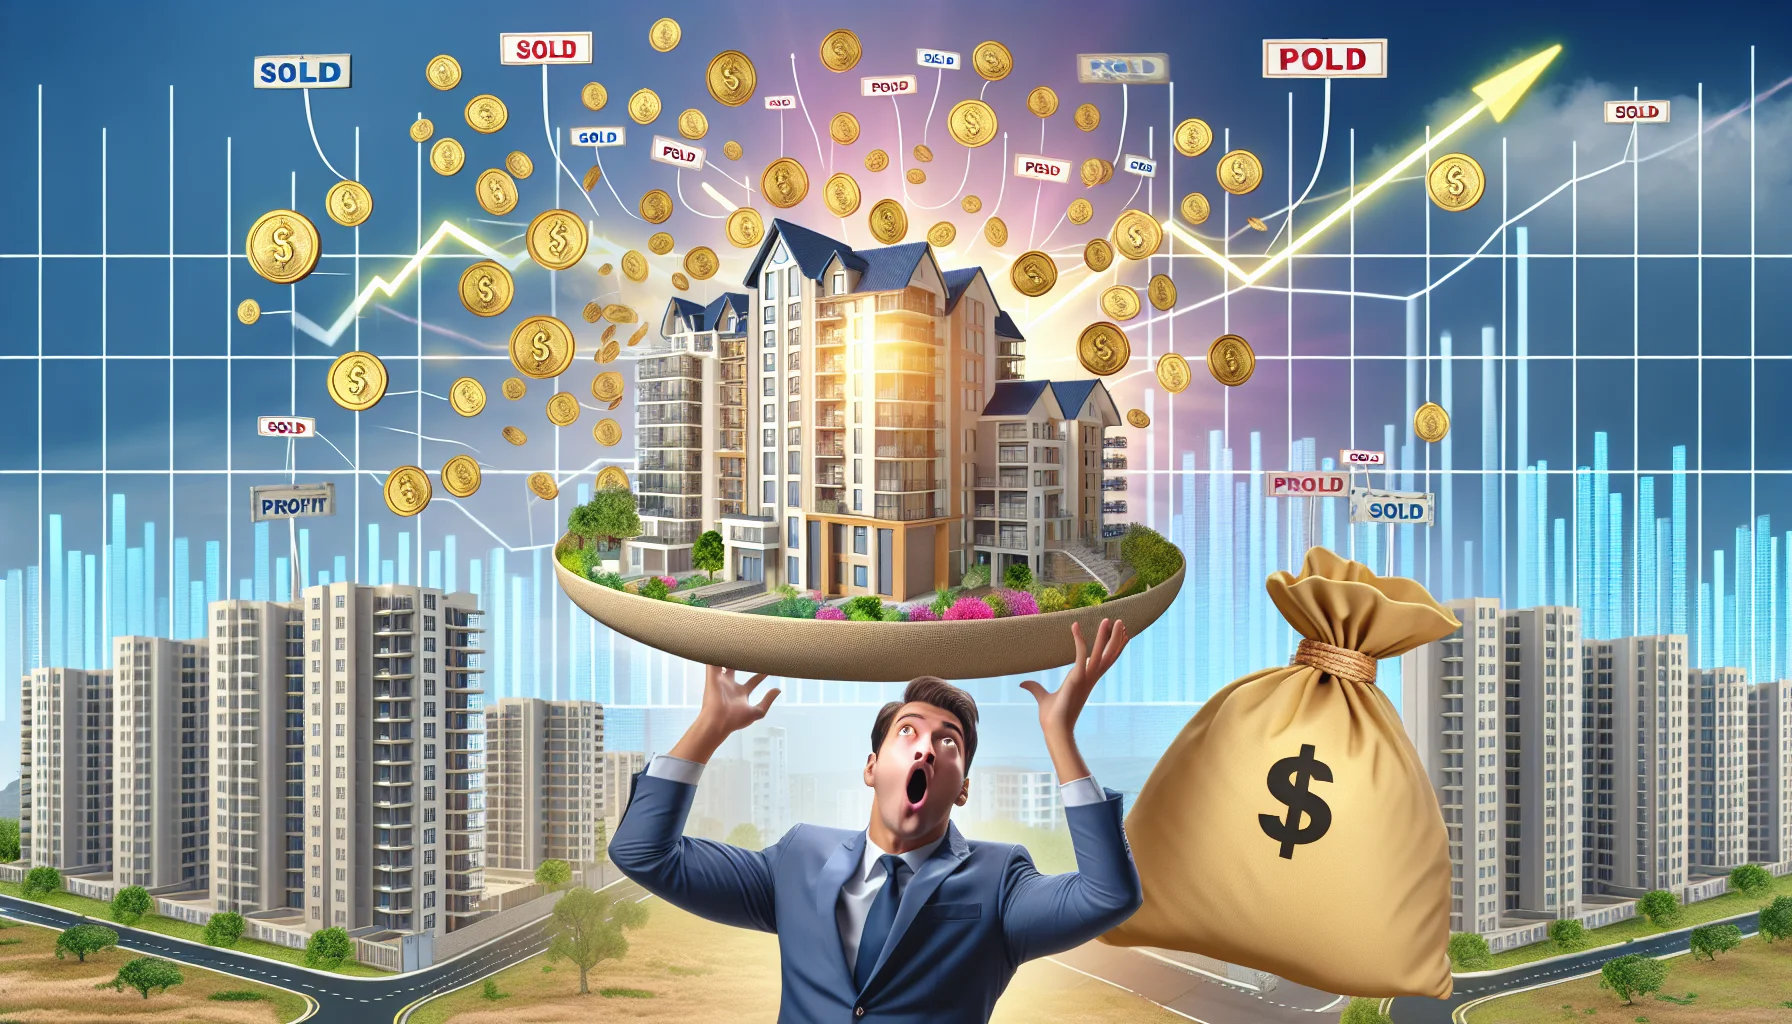 Create a humorous image showing a scenario of ideal real estate investment. It could be a person, both ecstatic and surprised, holding an intricate scale model of a beautiful, modern multi-storied residential building in one hand, and a bag, overflowing with gold coins marked 'profit,' in the other. The background is a sunny skyline with more buildings like the one in the scale model, all sold signboards, and a graph showing skyrocketing property values. Remember to make it as realistic as possible while still communicating the dream-like quality of the scenario.